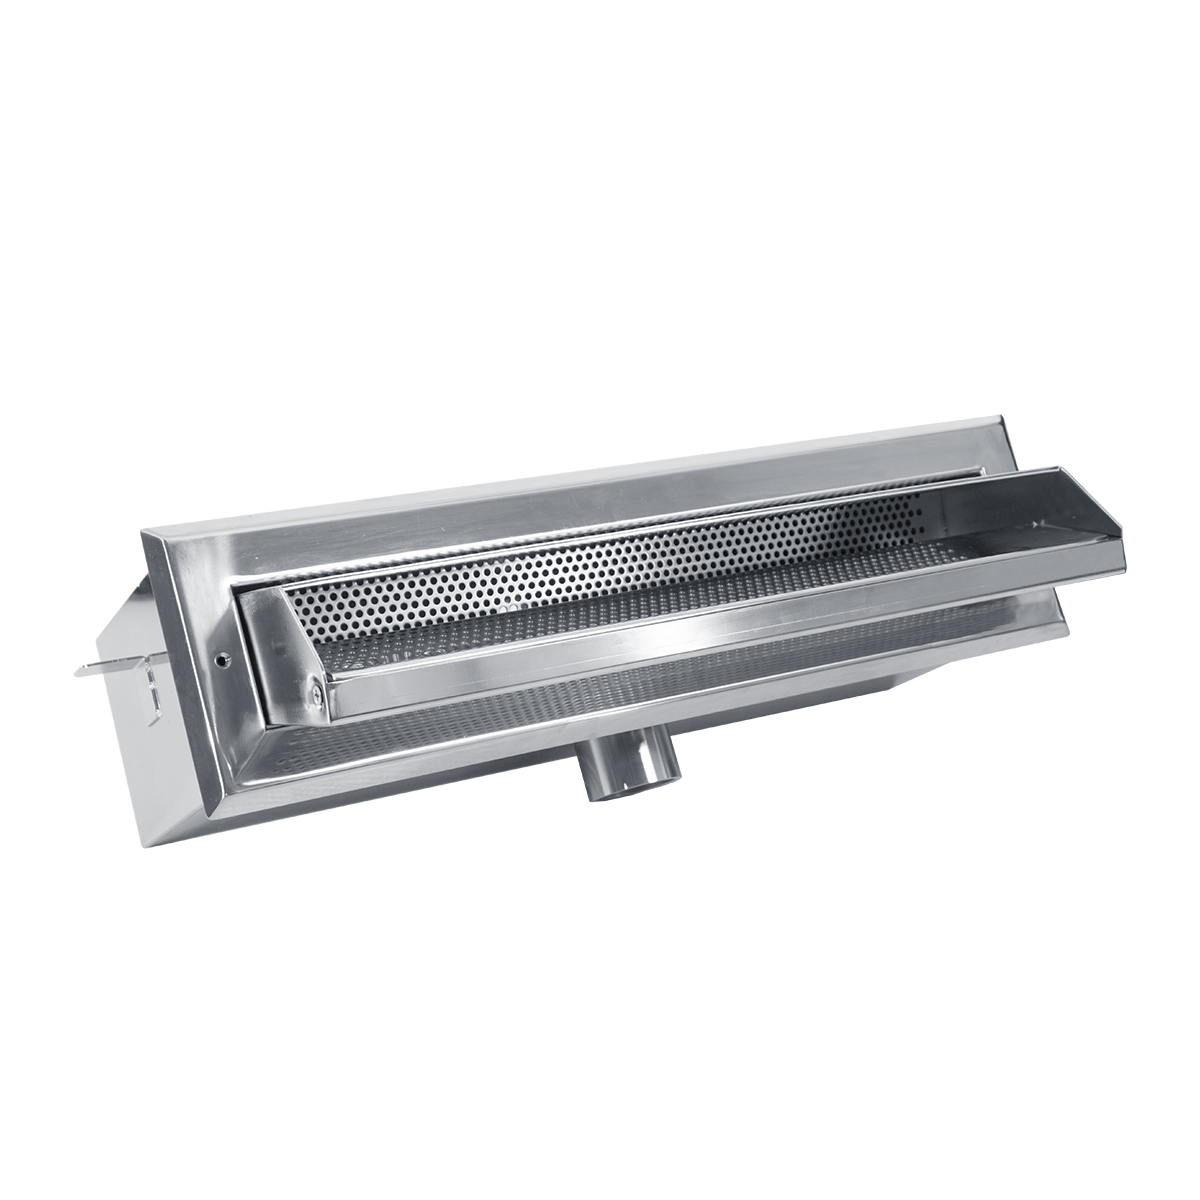 Smart high water level skimmer stainless steel V4A 600 for liner pools with frontal removable basket and integrated holder for niveau control Smart high water level skimmer stainless steel V4A 600 for liner pools with frontal removable basket and integrated holder for niveau control